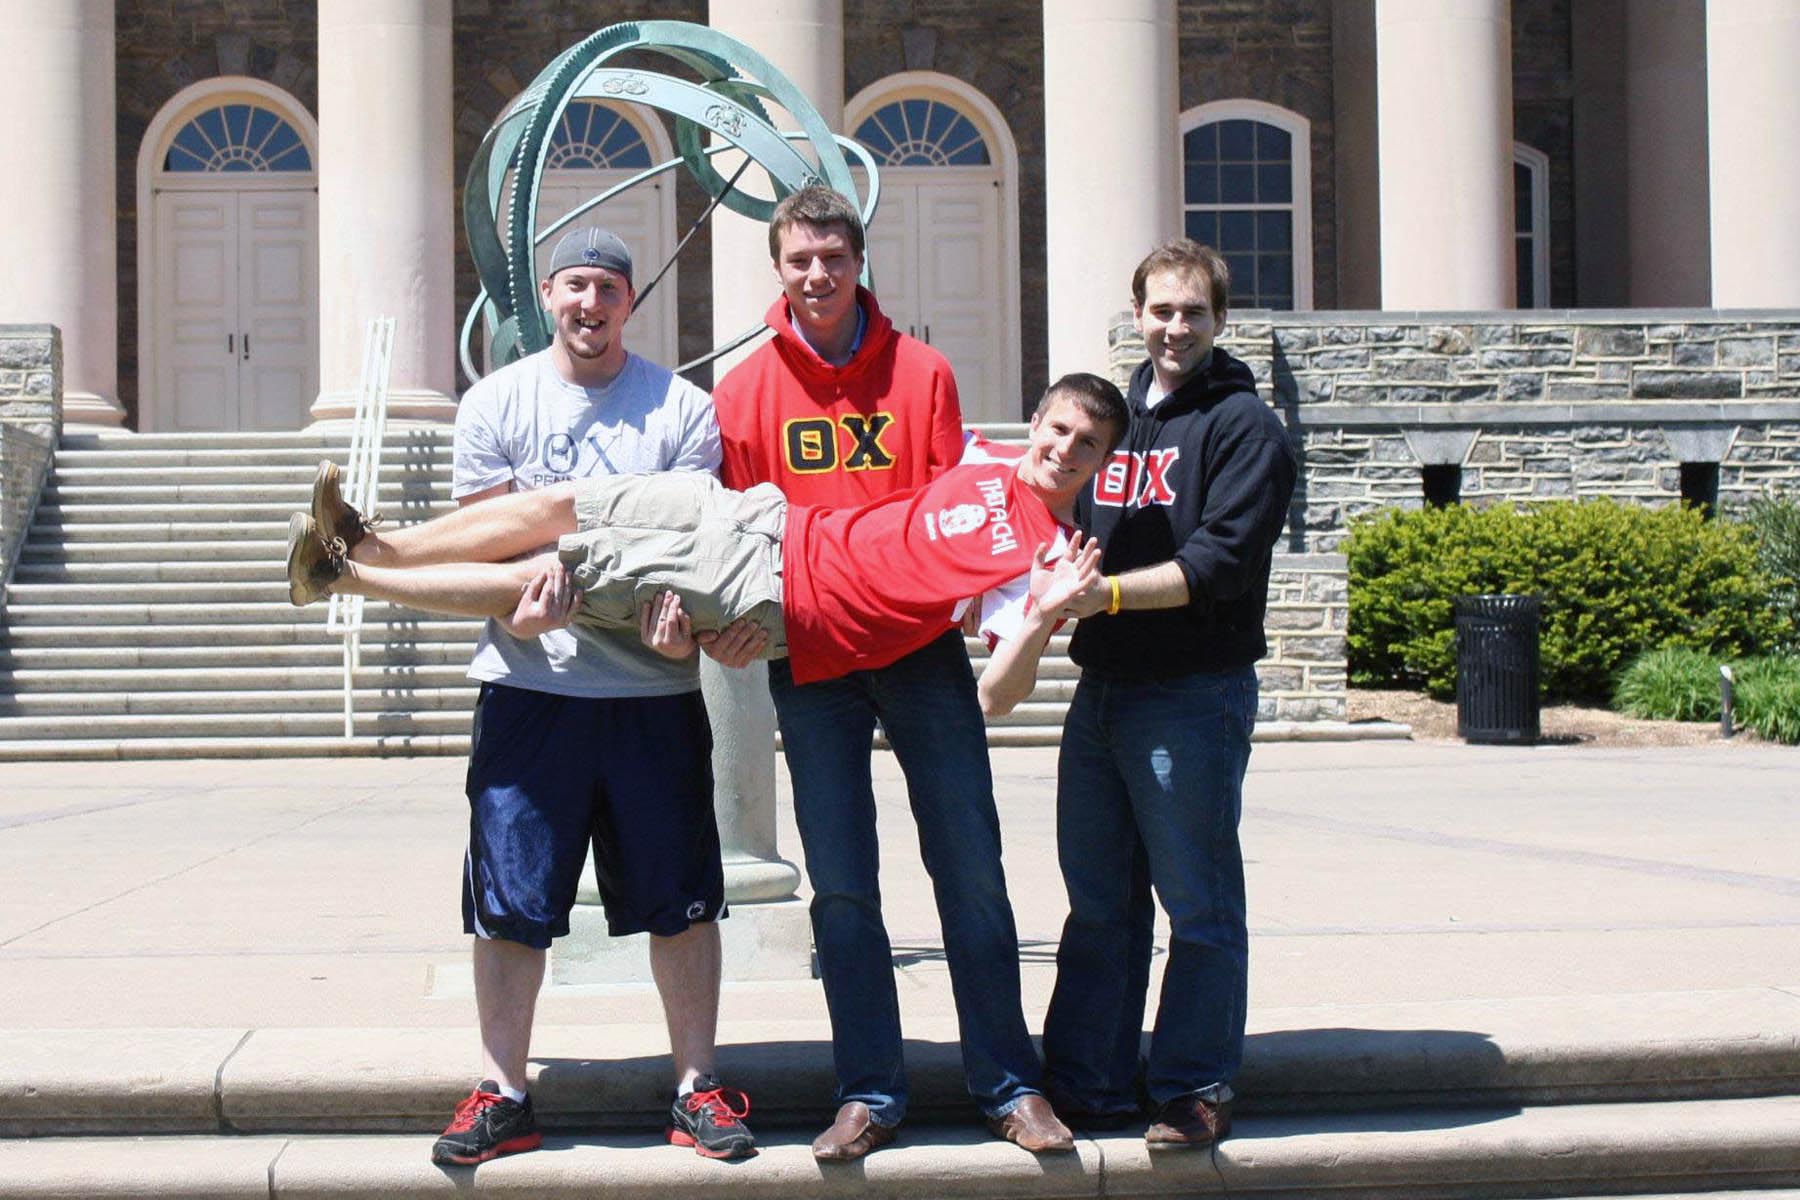  L to R: Jerry Crompton, Jeb Biernat, Mark Moseley and Michael Schappe
2012 End of Spring Semester 